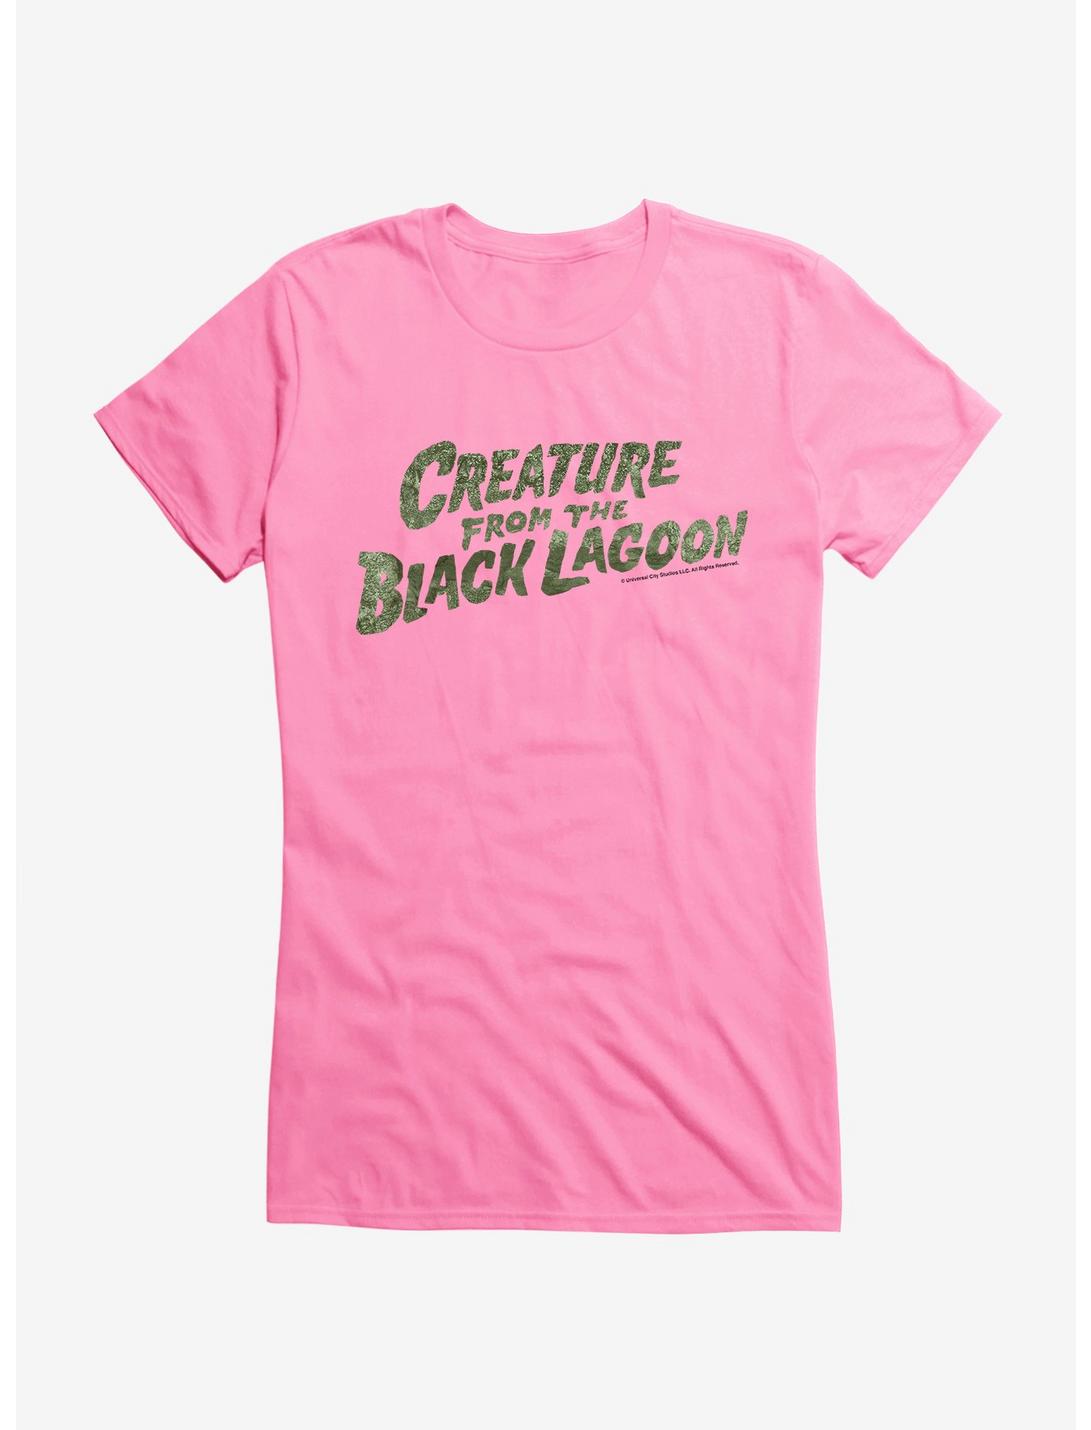 The Creature From The Black Lagoon Title Girls T-Shirt, CHARITY PINK, hi-res